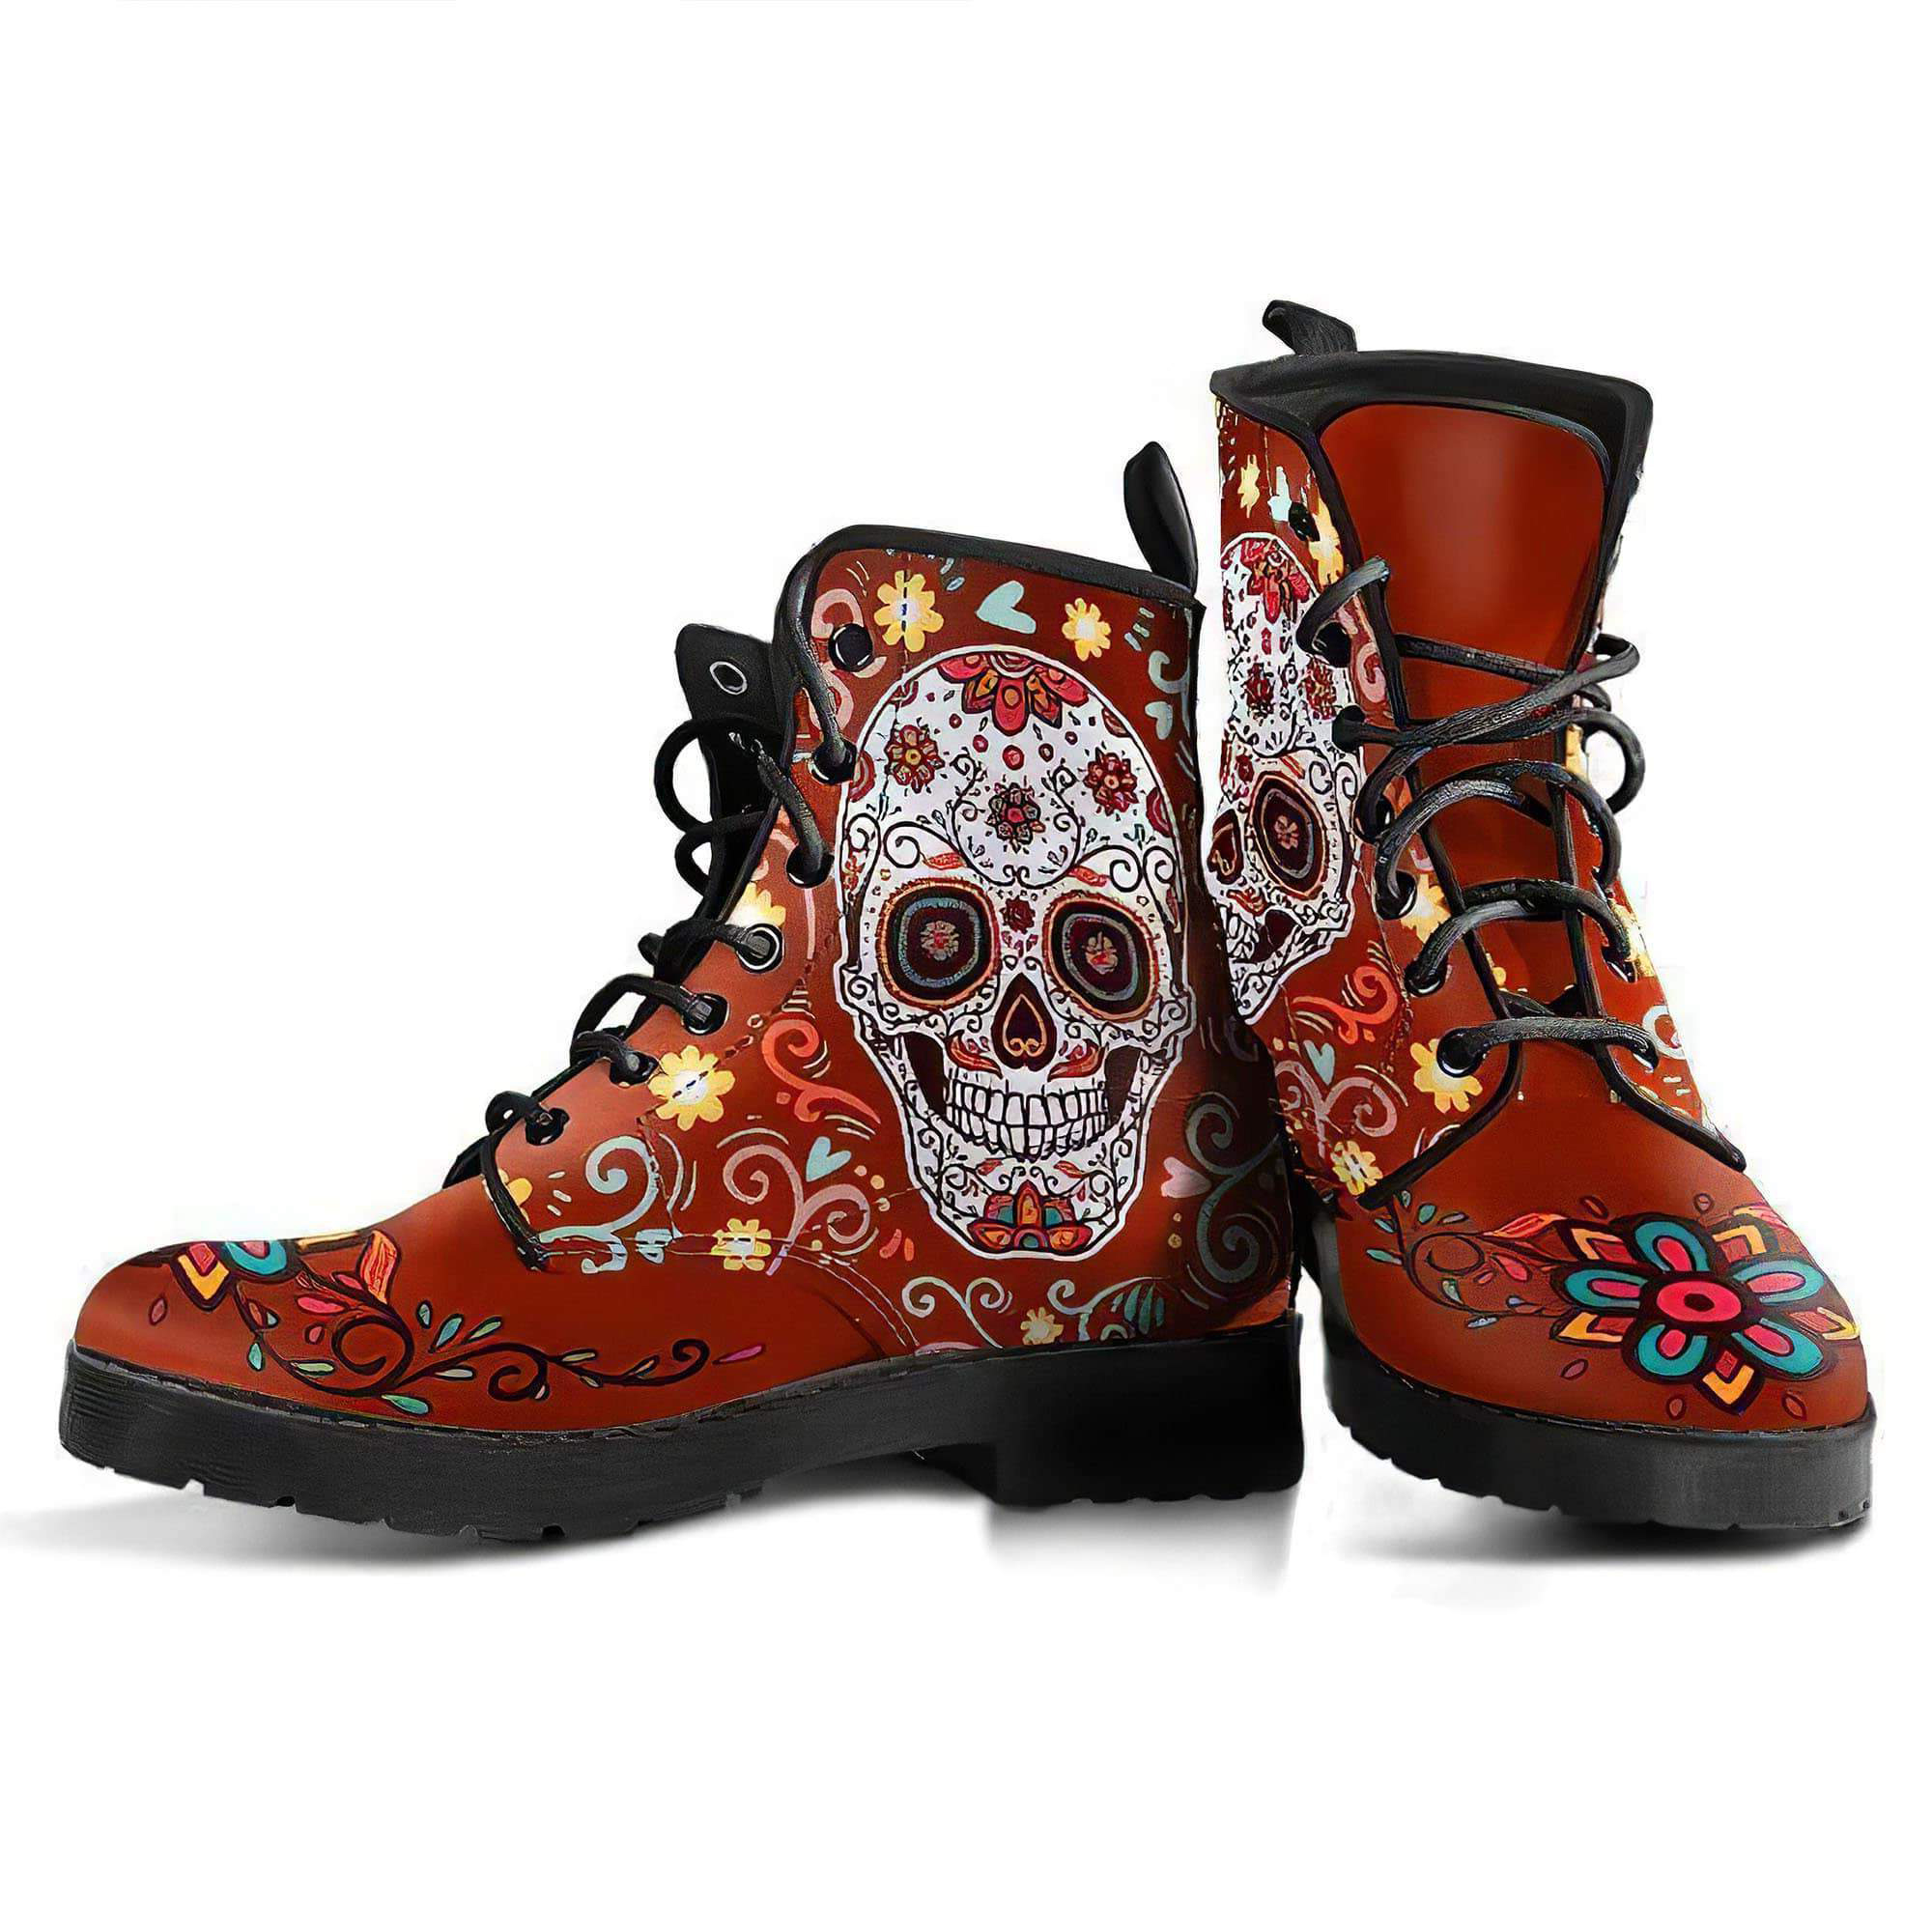 red-sugar-skull-women-s-boots-vegan-friendly-leather-women-s-leather-boots-12051944931389.jpg